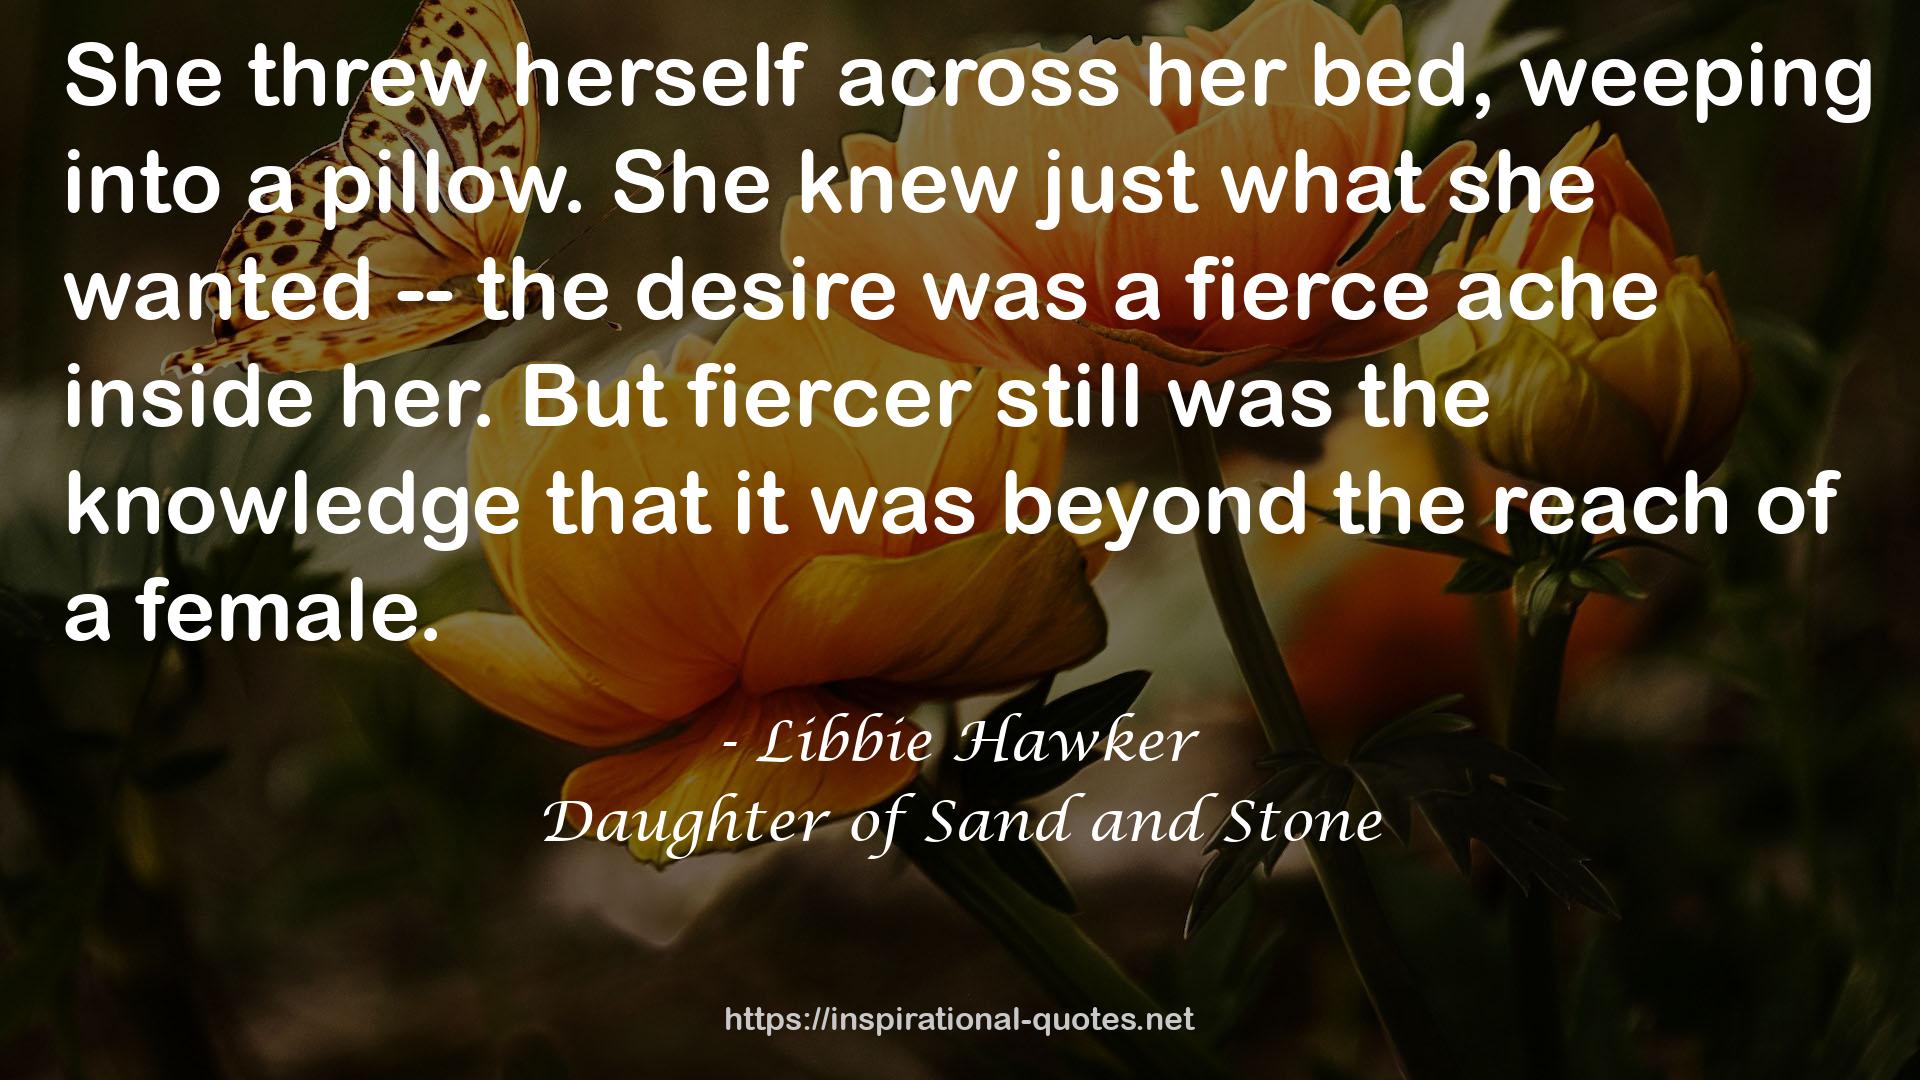 Daughter of Sand and Stone QUOTES